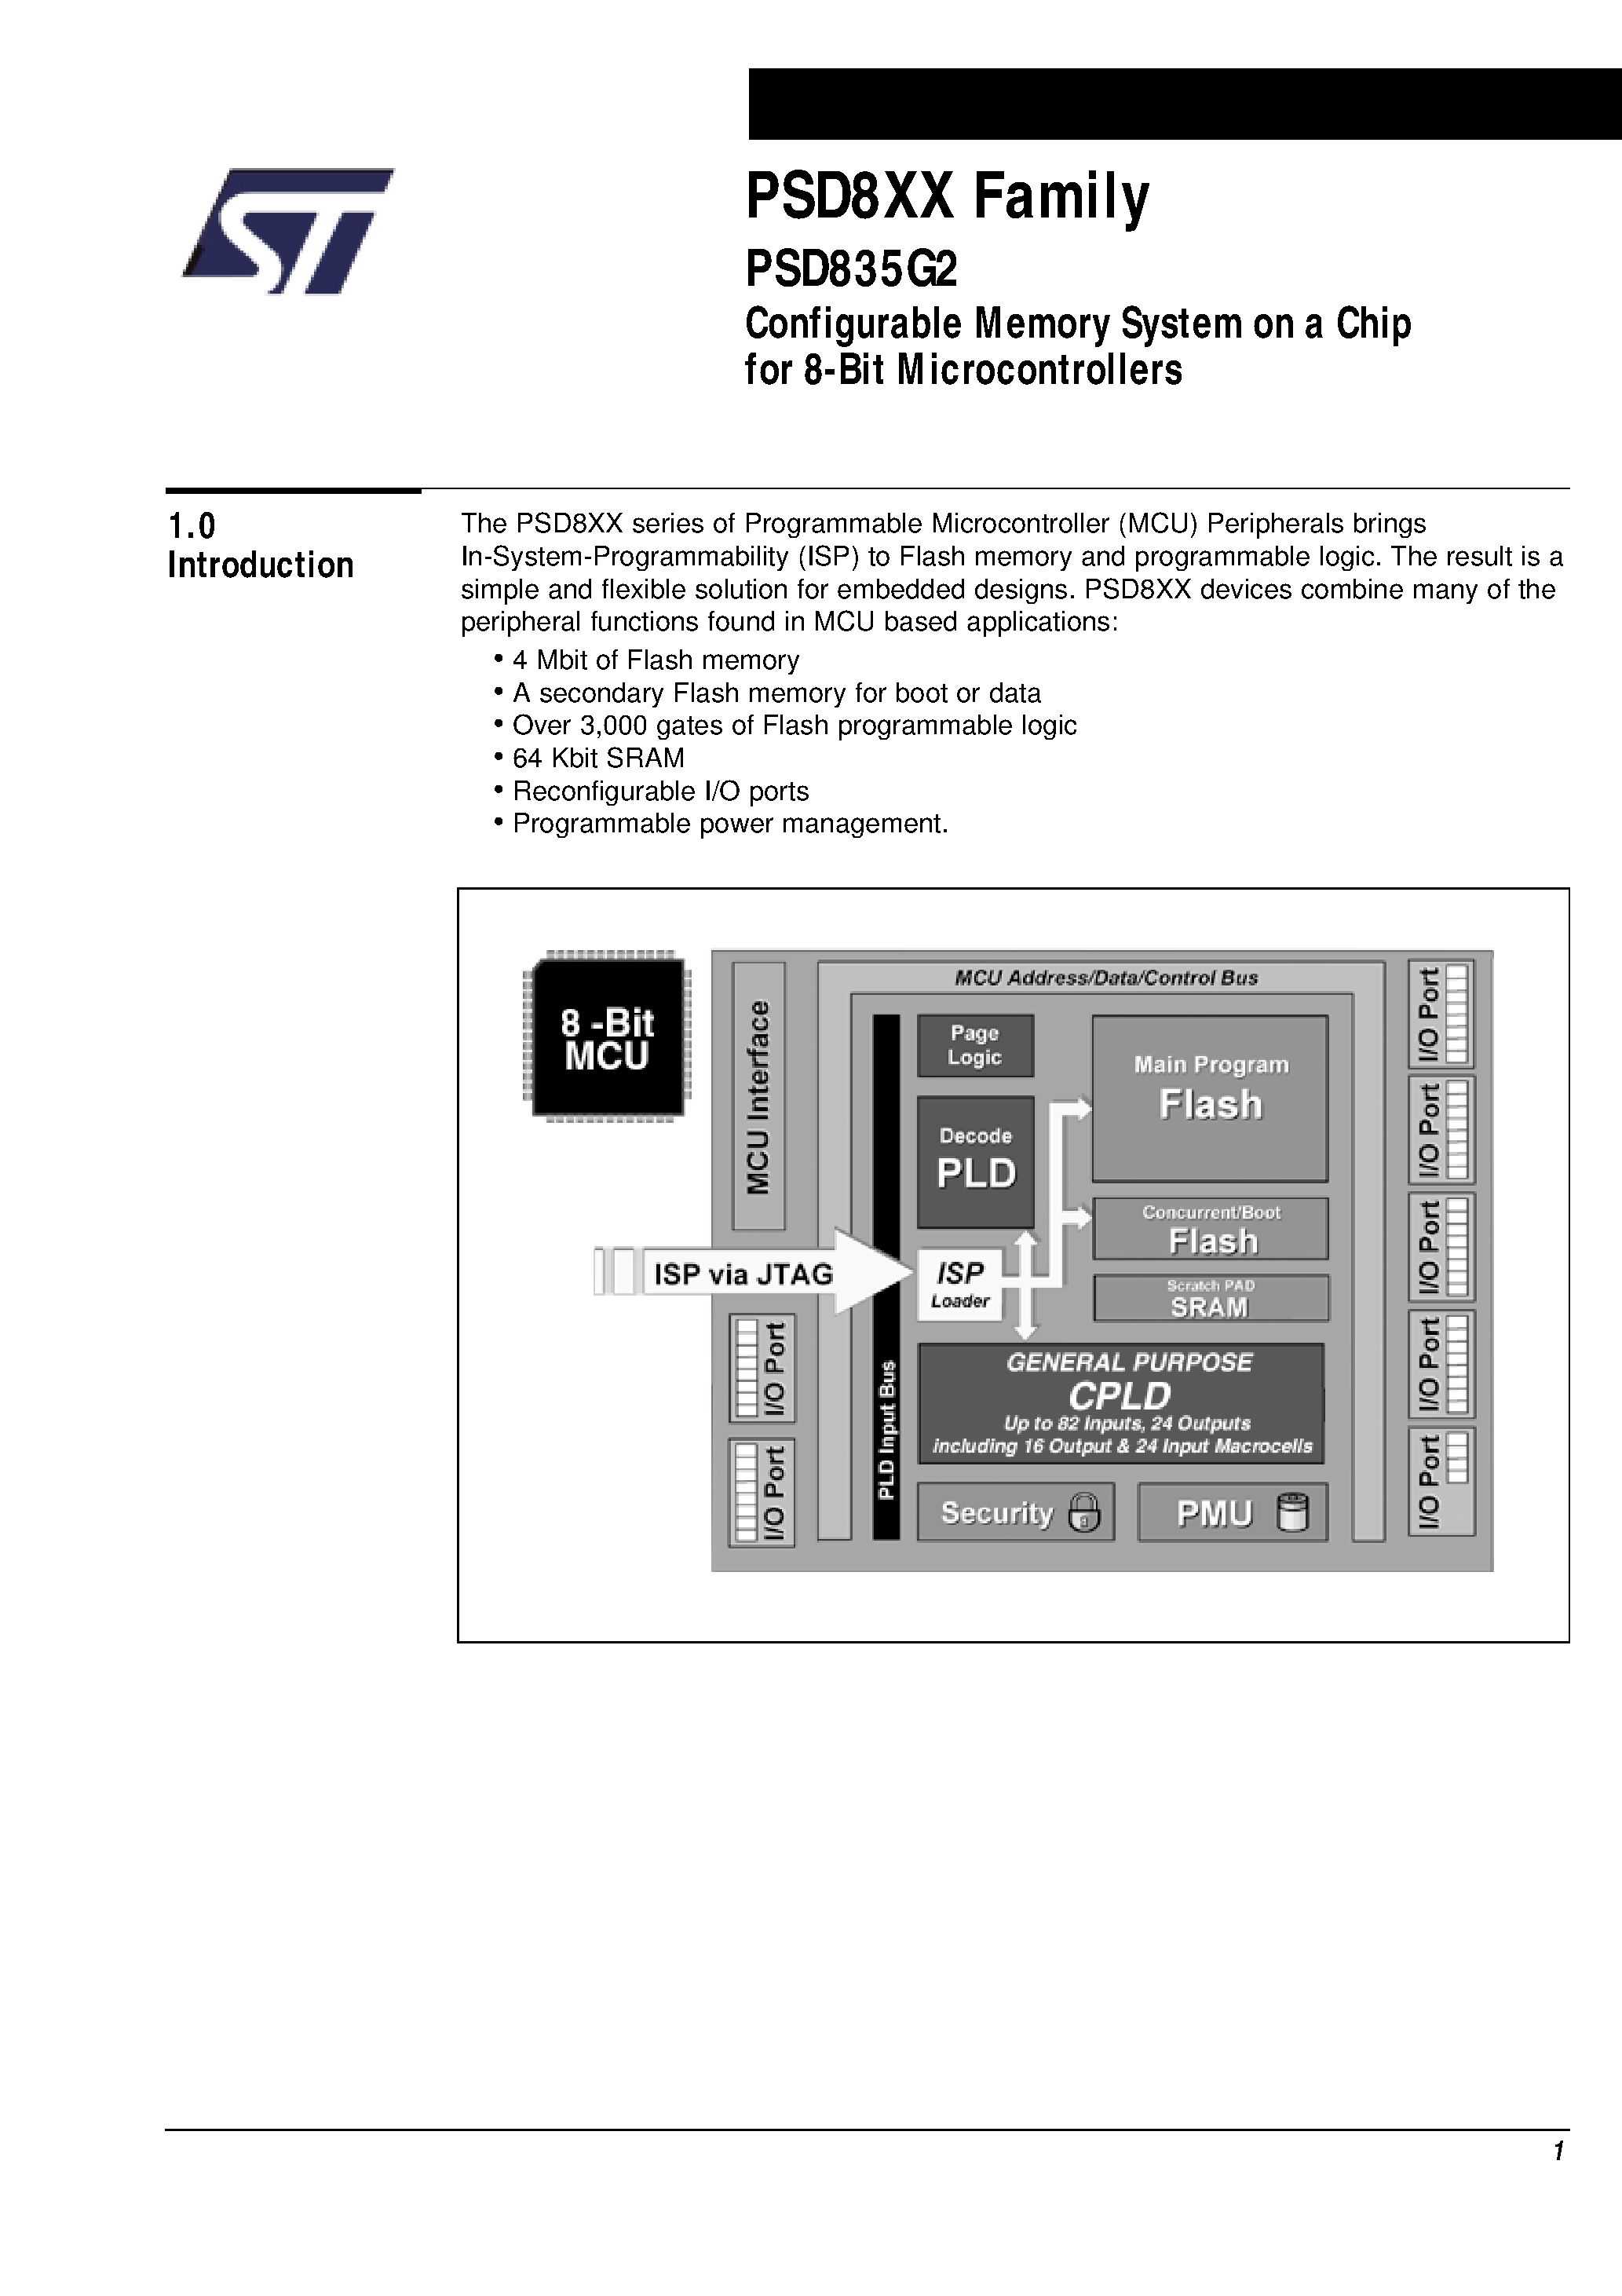 Datasheet PSD835F2V-A-15MI - Configurable Memory System on a Chip for 8-Bit Microcontrollers page 2